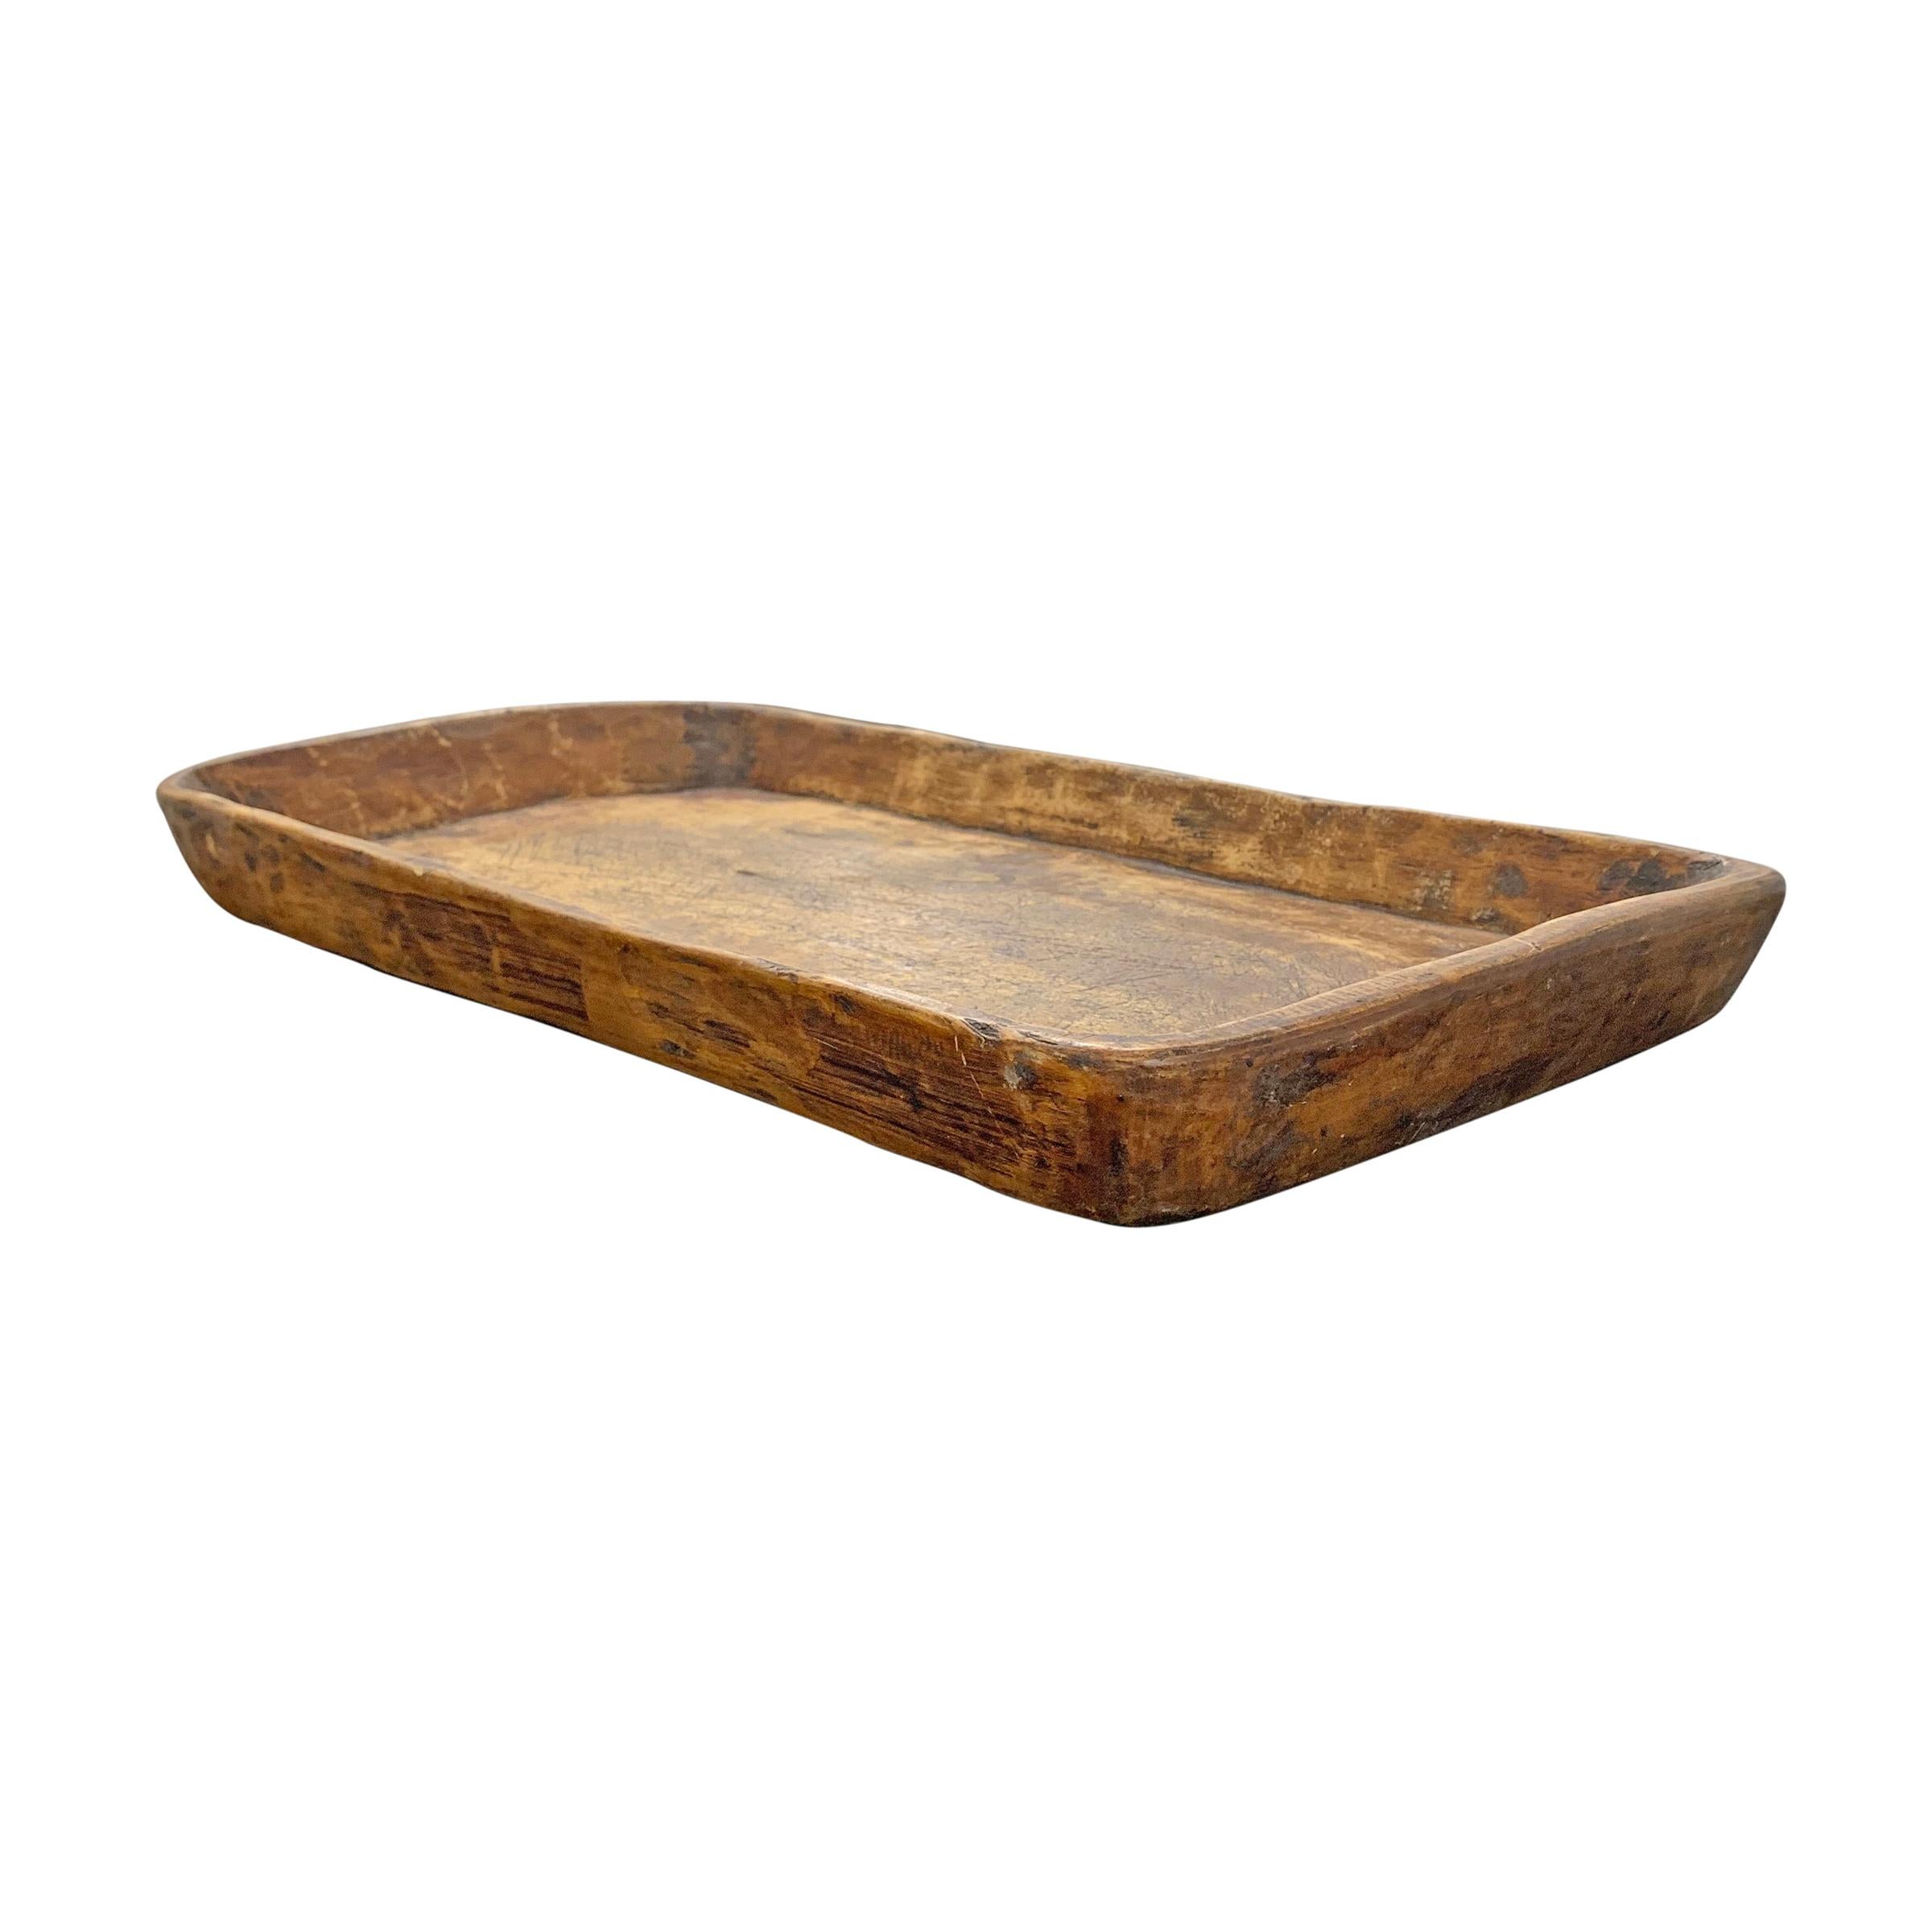 Rustic 19th Century Carved Wood Tray